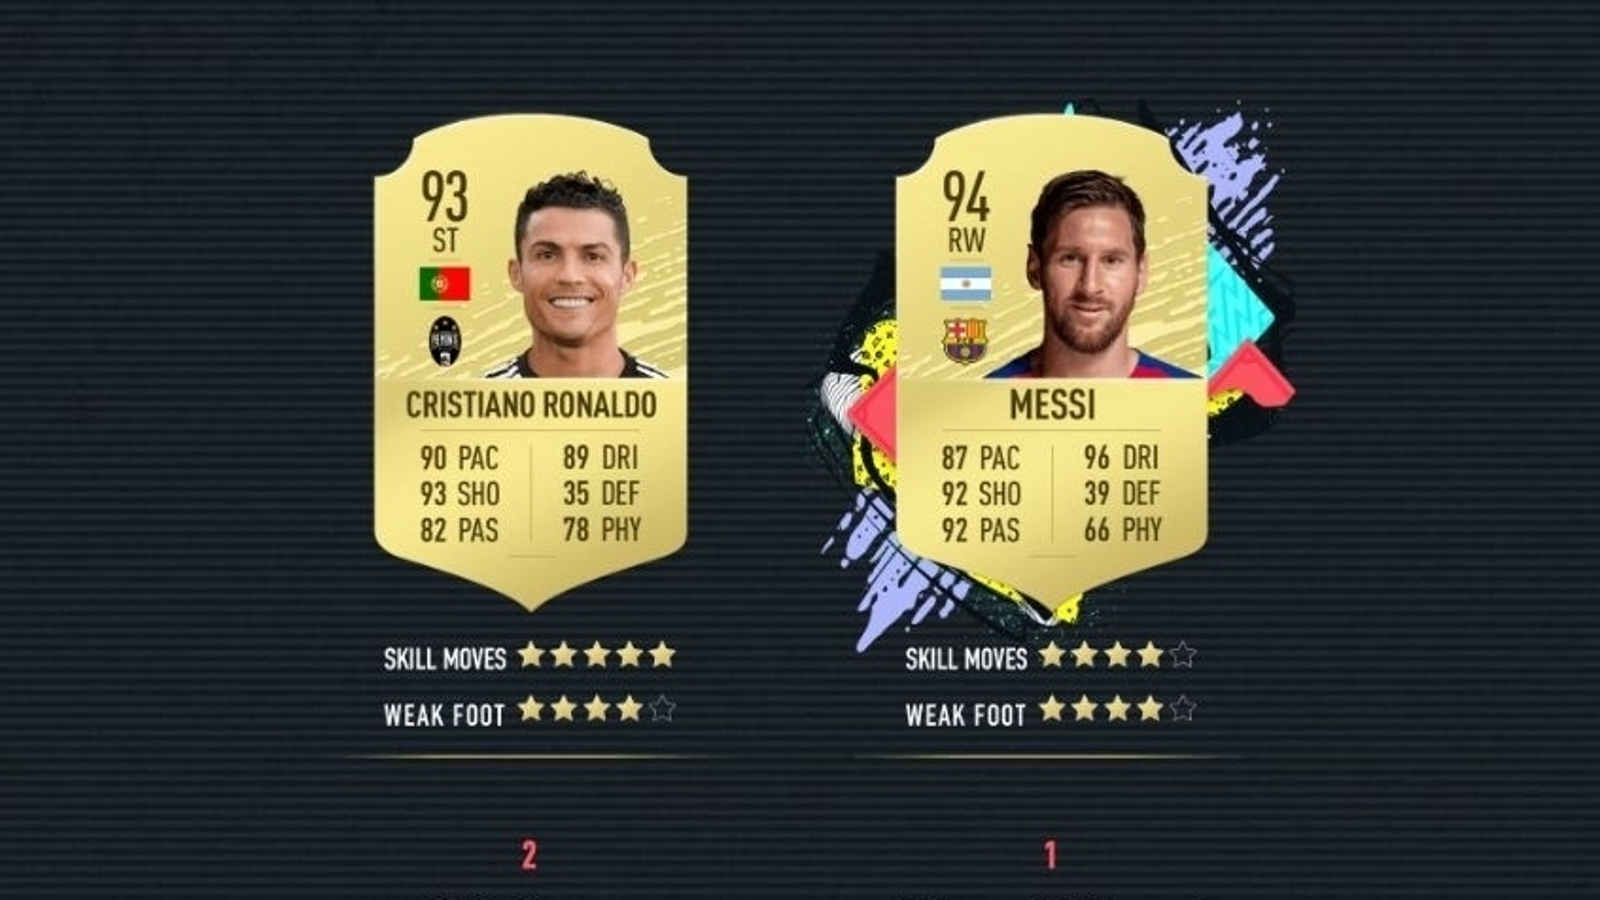 Fifa 20 Player Ratings And Best Players - The Top 100 Best Fifa 20 Players  Ranked By Overall Rating | Eurogamer.Net